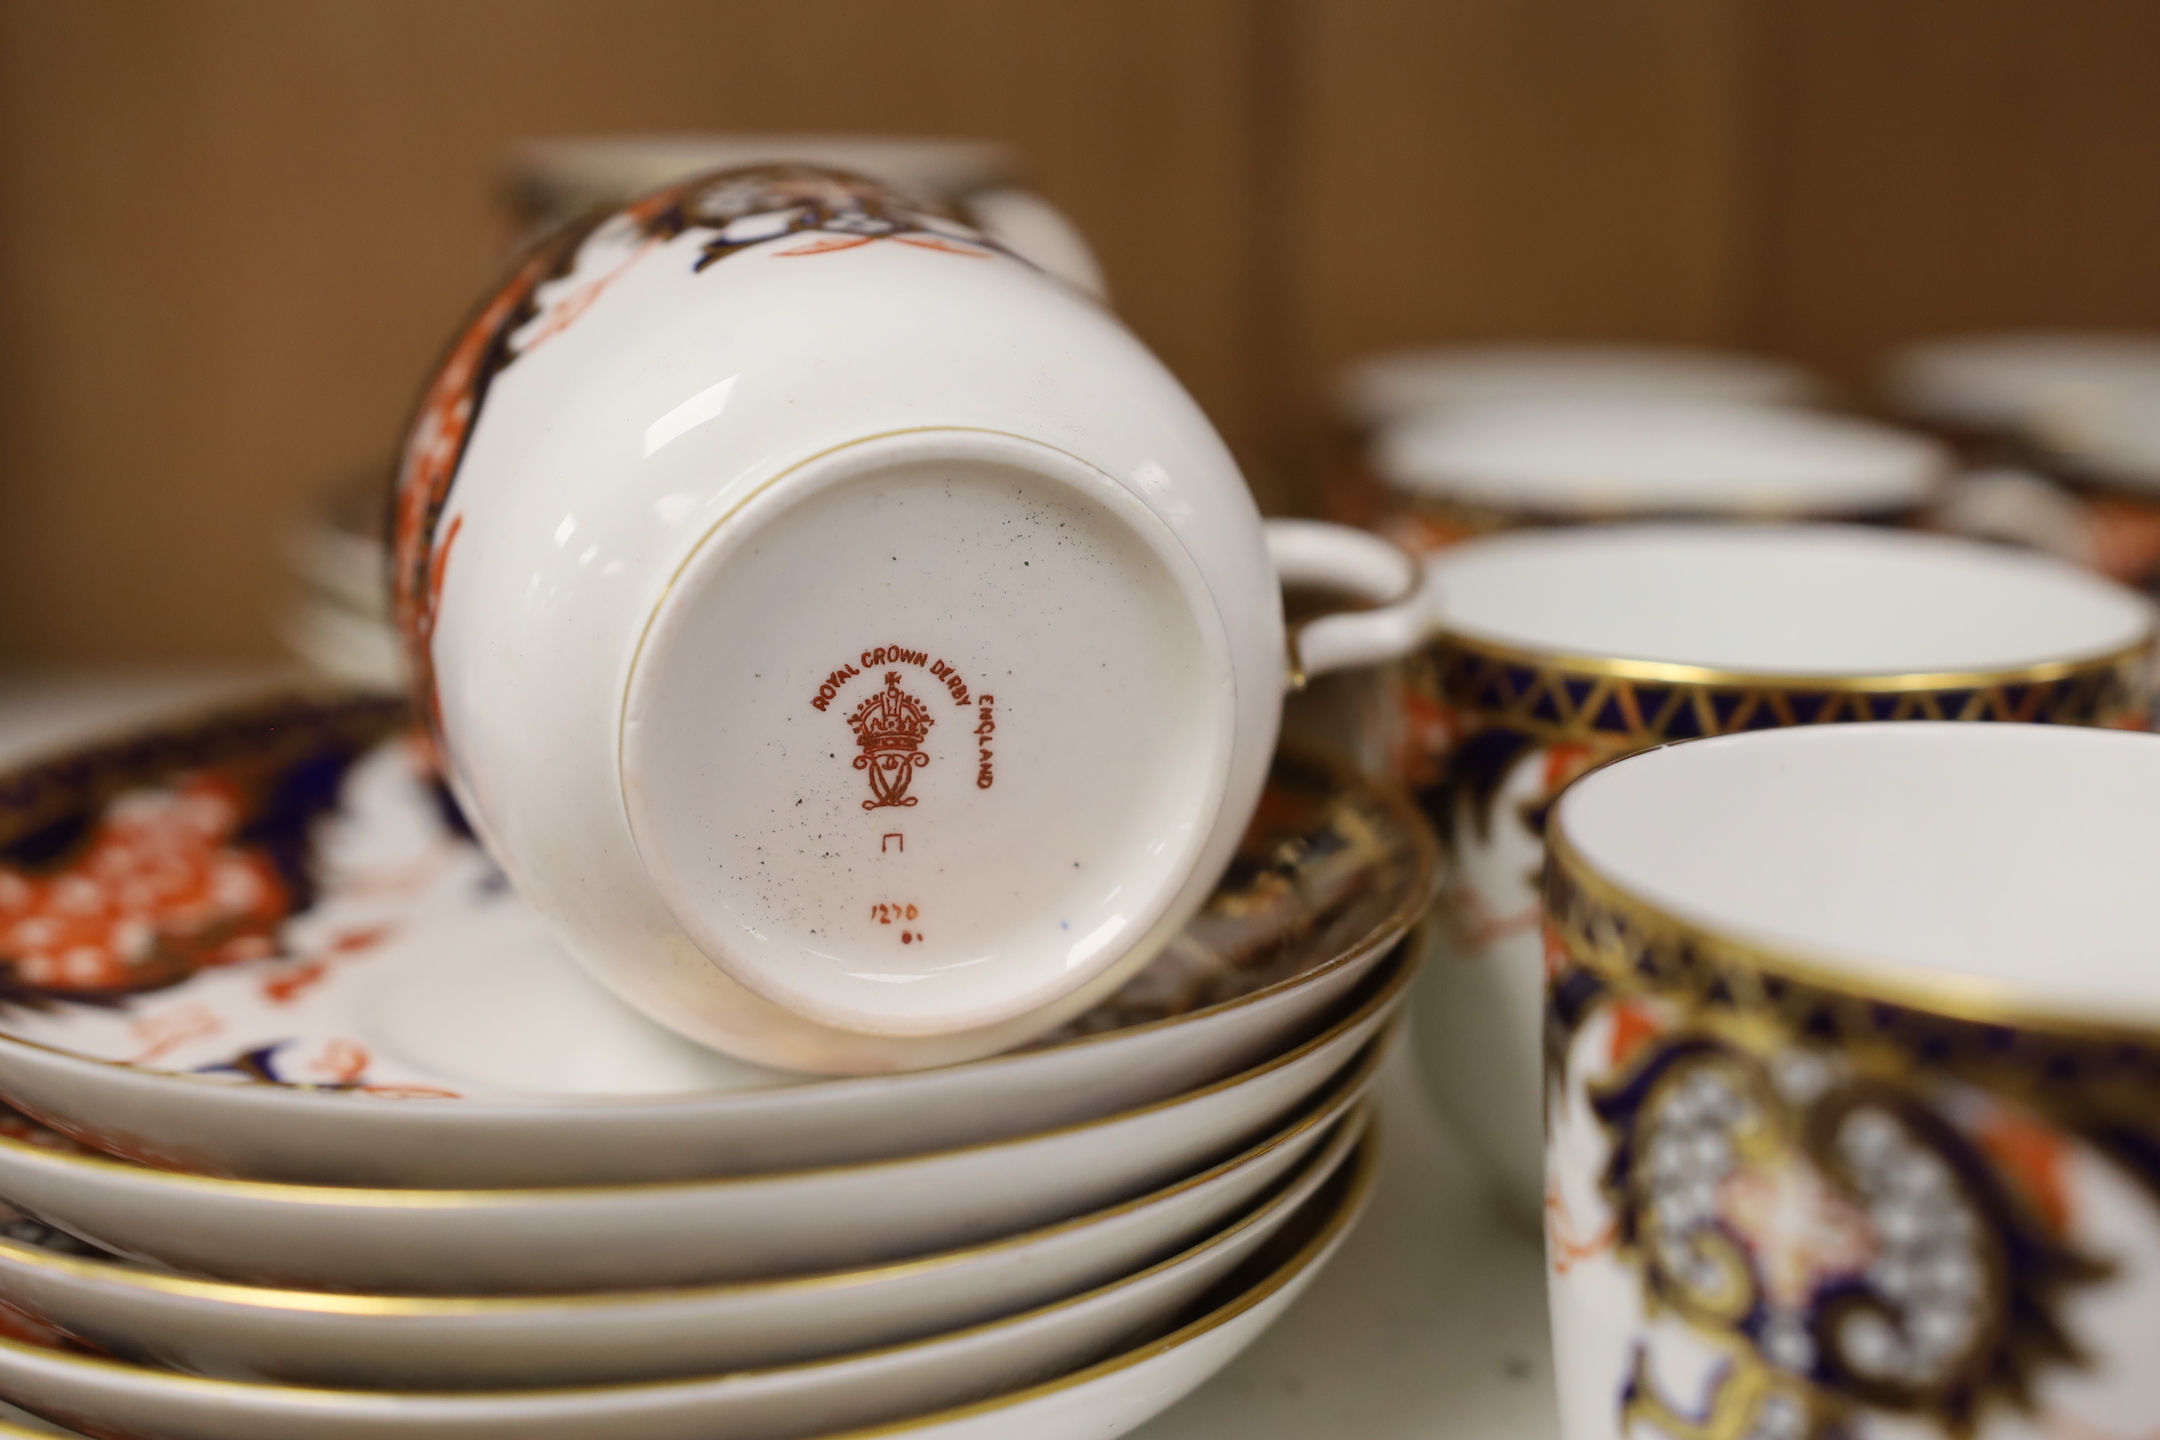 A Royal Crown Derby Imari pattern 1270 part coffee set and Royal Worcester coffee cans etc.